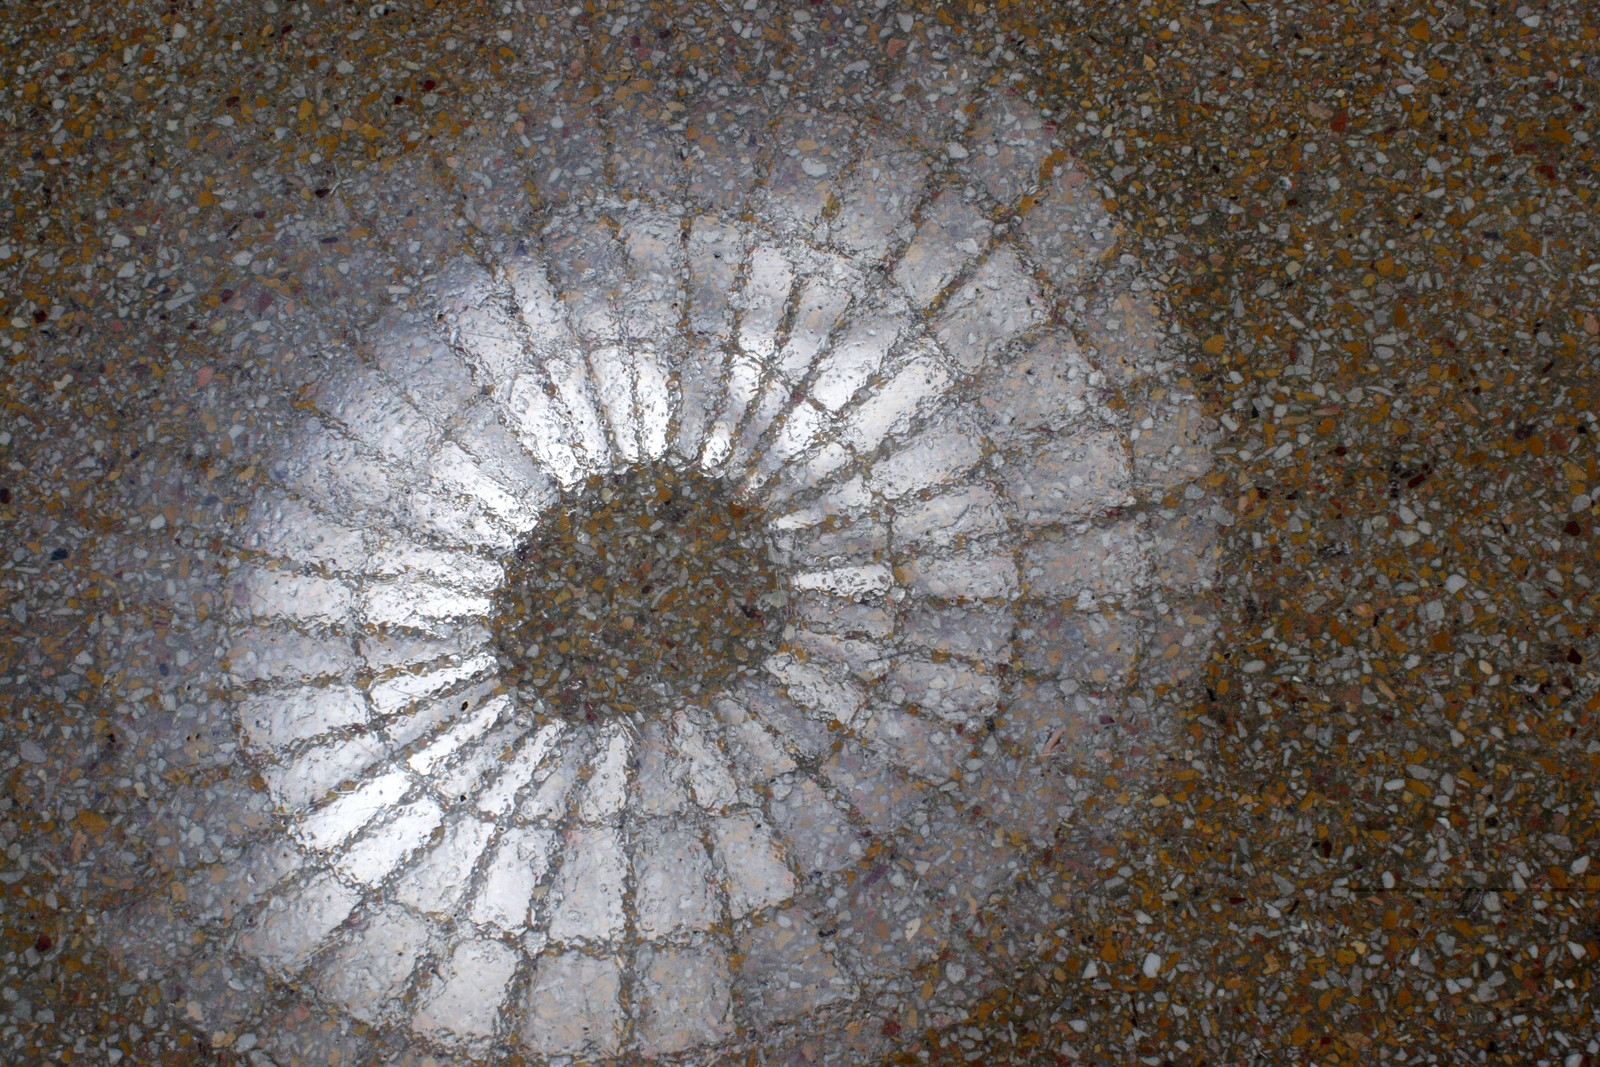 A circular, meditative pattern of light reflected against a wet gravel concrete.